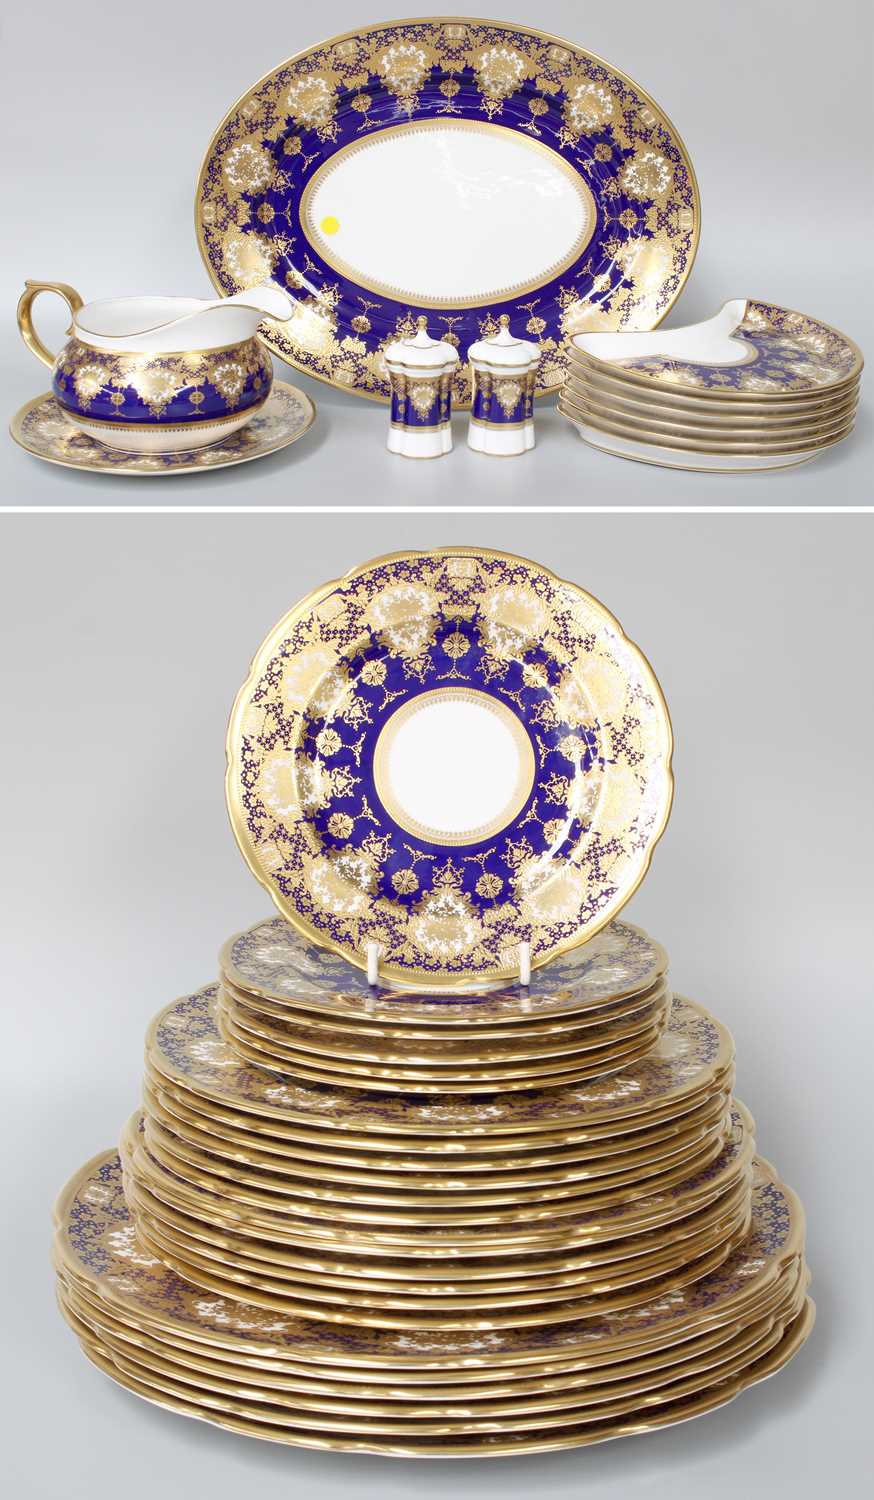 A Thomas Goode Marquis de Mos Pattern Dinner Service, with Thomas Goode booklet and purchase